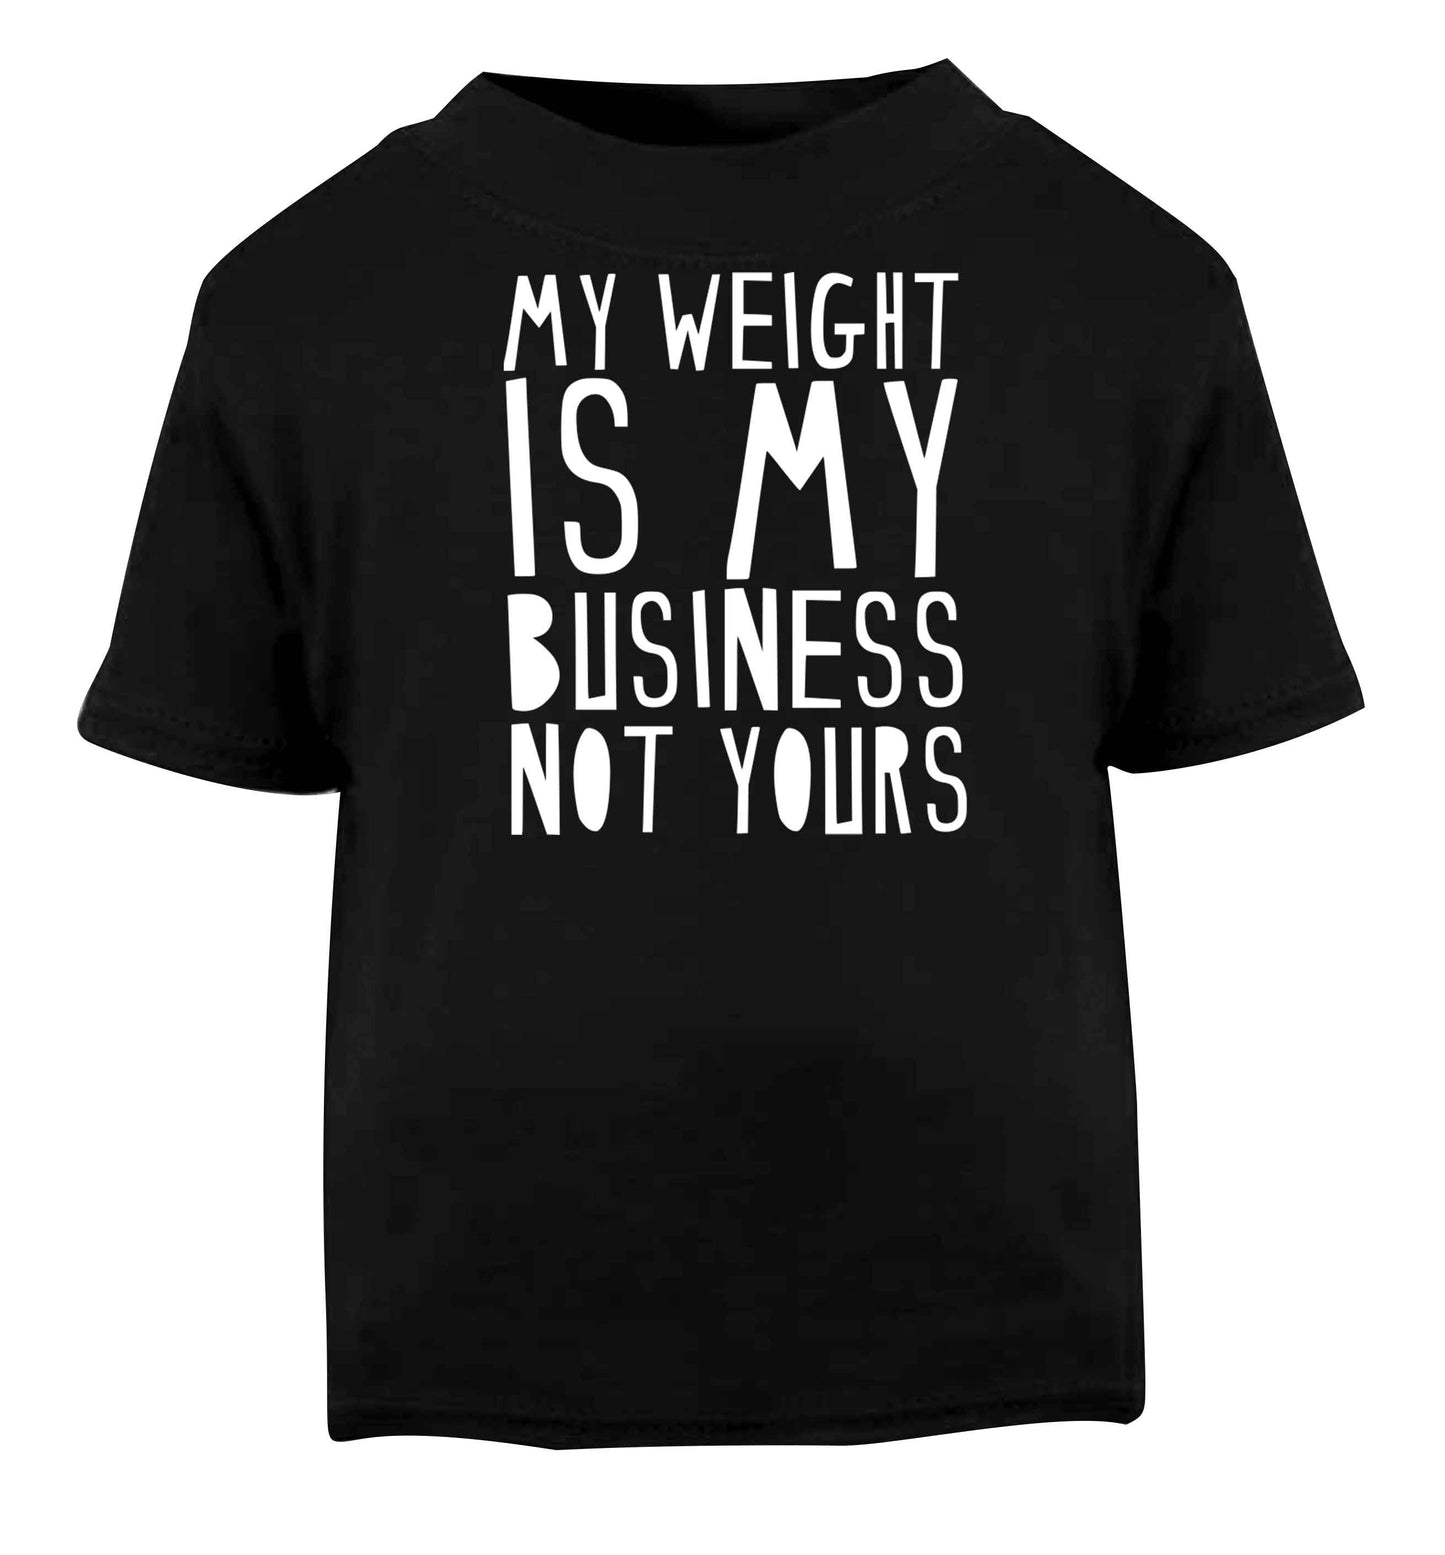 My weight is my business not yours Black baby toddler Tshirt 2 years